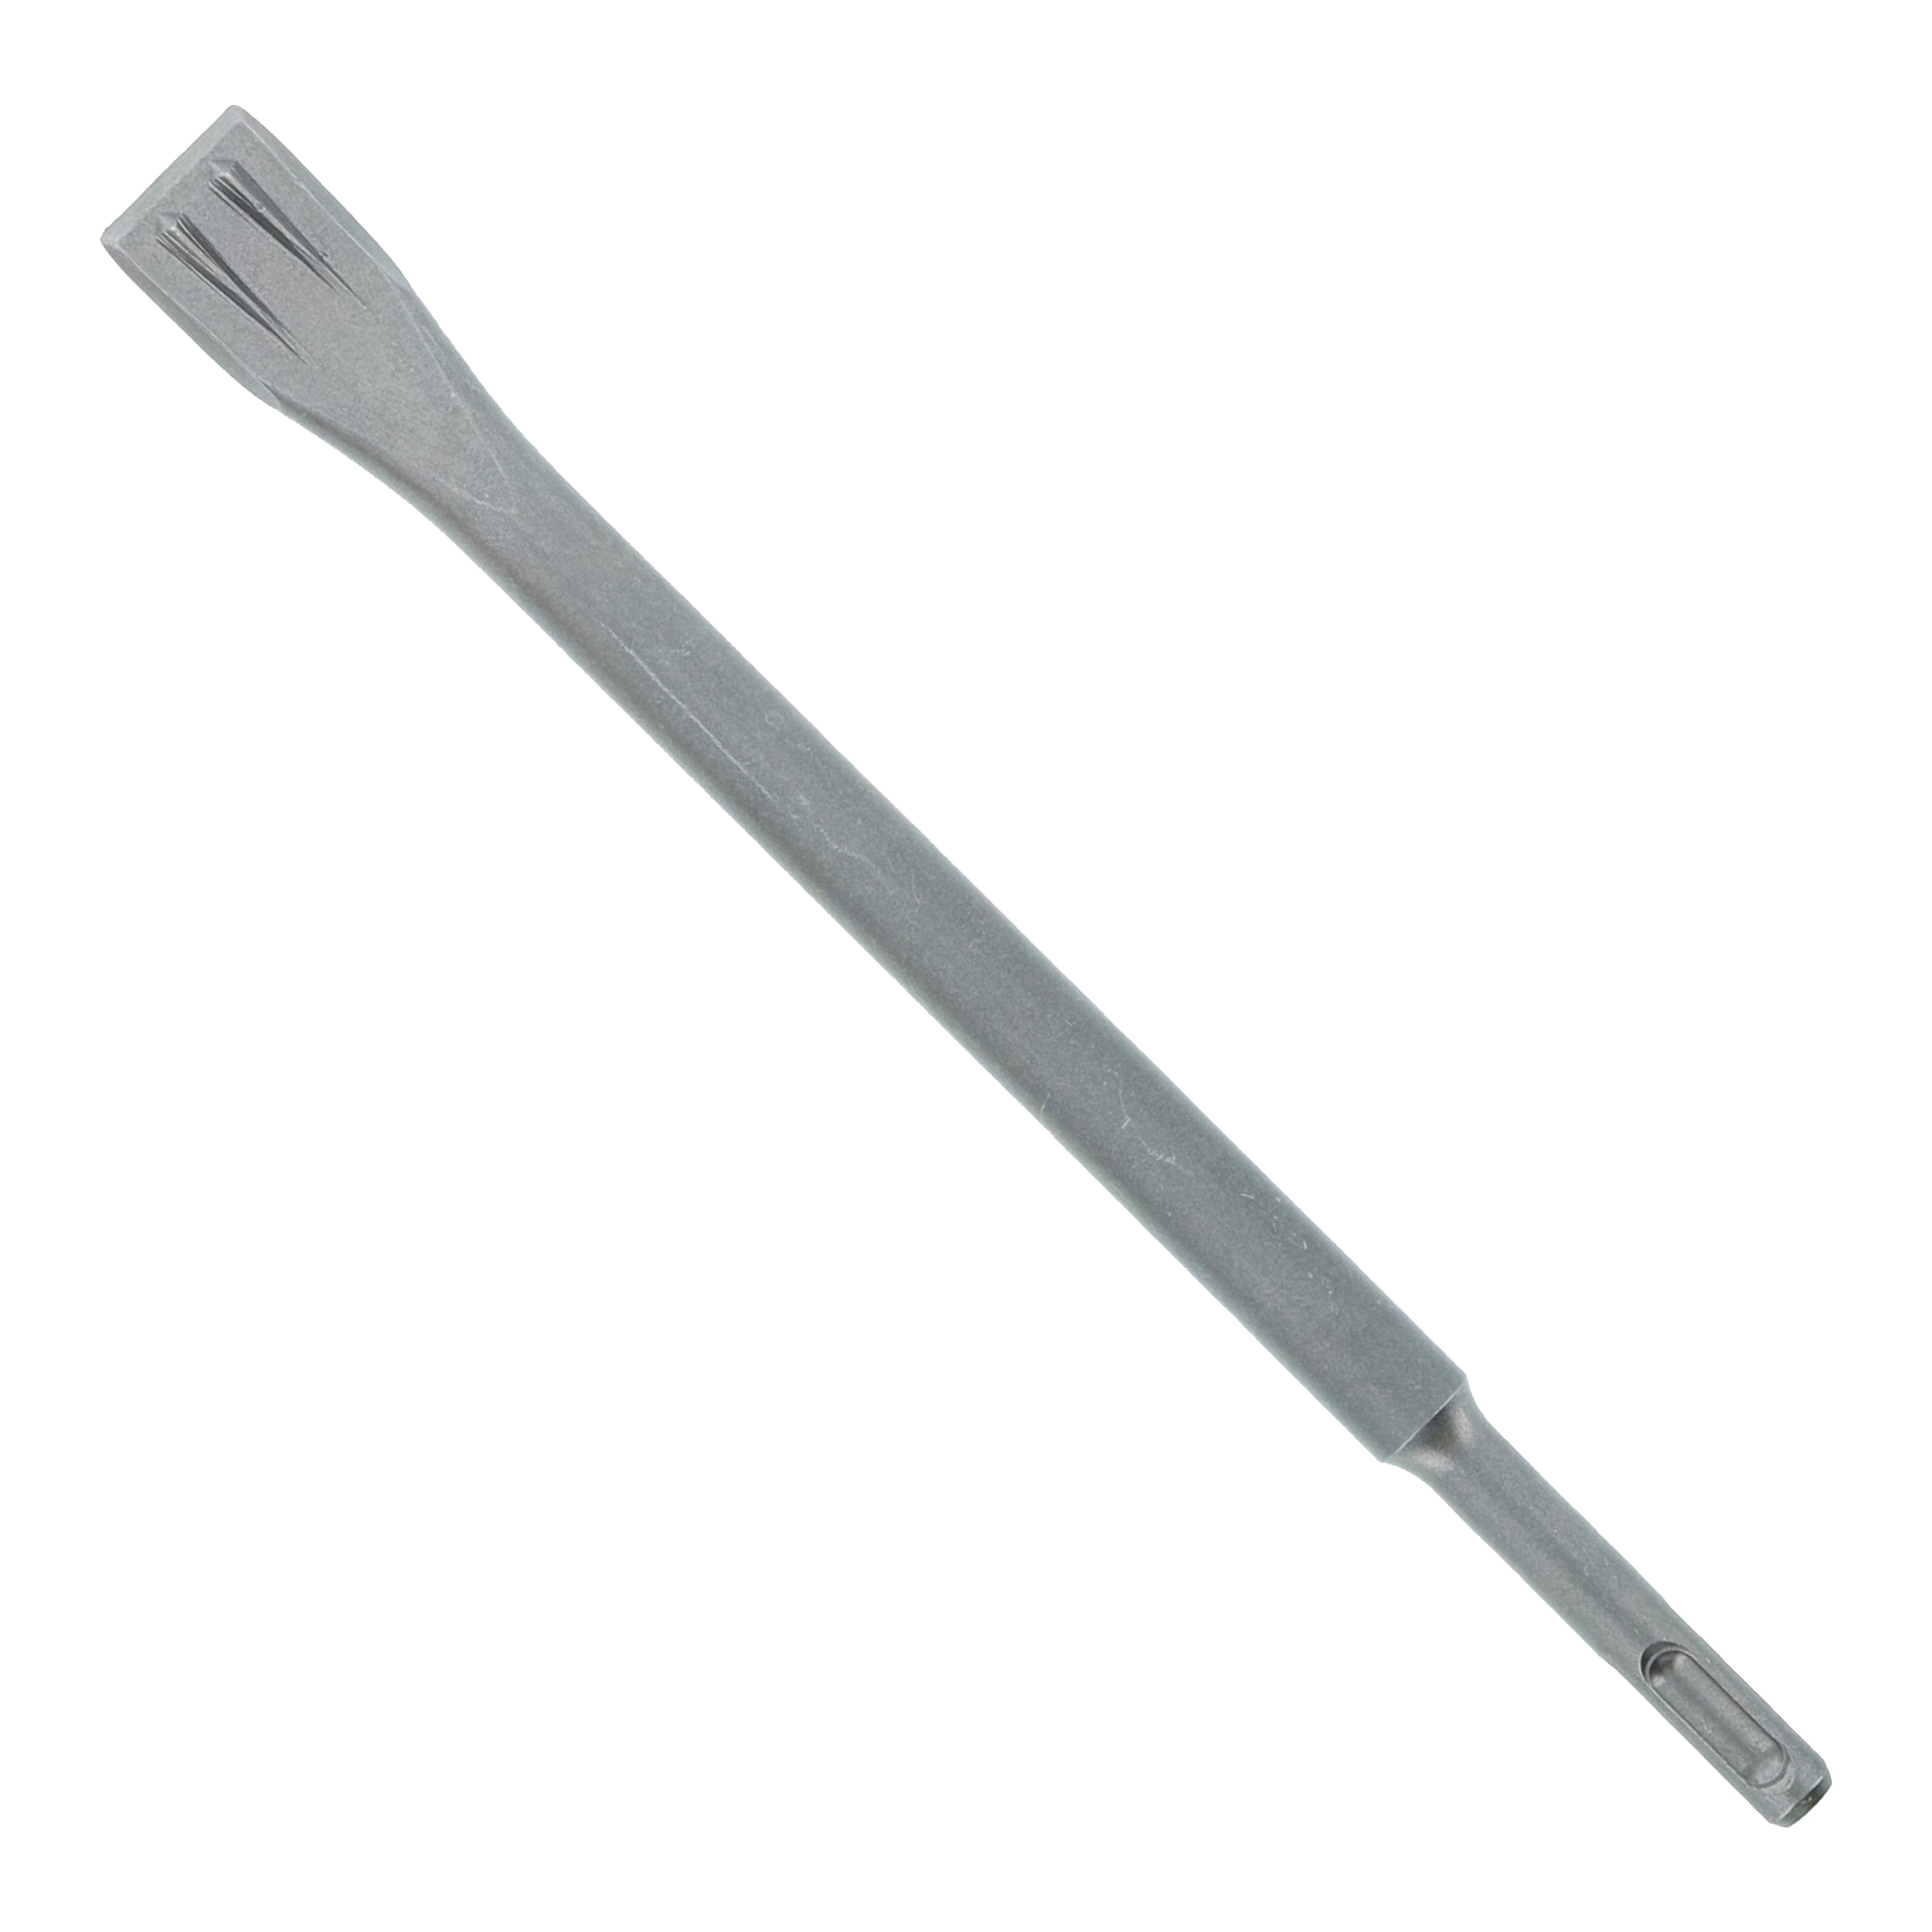 DMAPLCH2010 Drill Bit, 3/4 in Dia, 10 in OAL, Dual Tooth, 10 mm Dia Shank, SDS Plus Shank